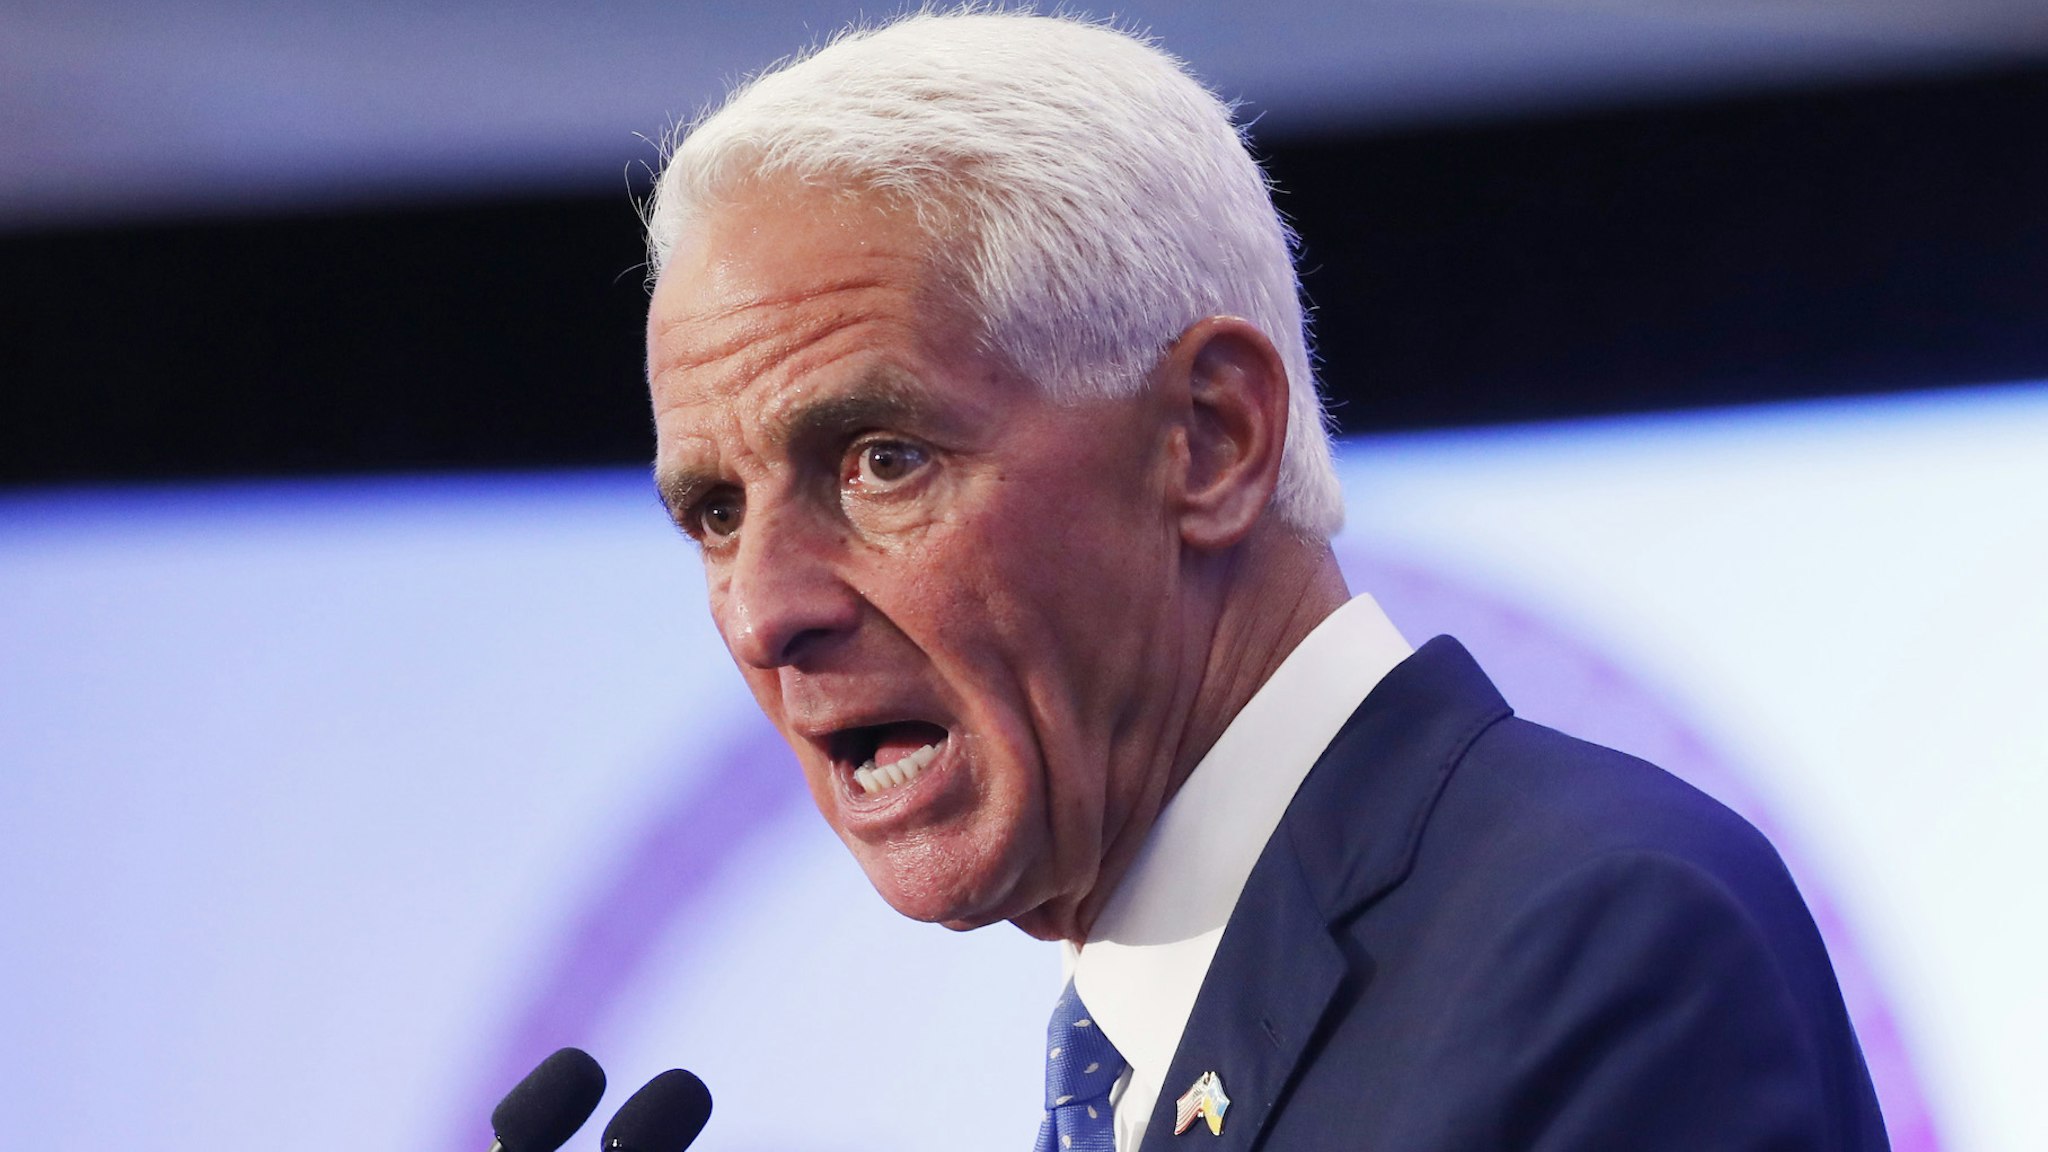 ST PETERSBURG, FL - AUGUST 23: Florida Gubernatorial candidate Rep. Charlie Crist (D-FL) gives a victory speech after defeating gubernatorial candidate, Commissioner of Agriculture Nikki Fried in the primary election at the Hilton St. Petersburg Bayfront on August 23, 2022 in St Petersburg, Florida.Crist will face Florida Governor Ron DeSantis on November 8th in the general election.